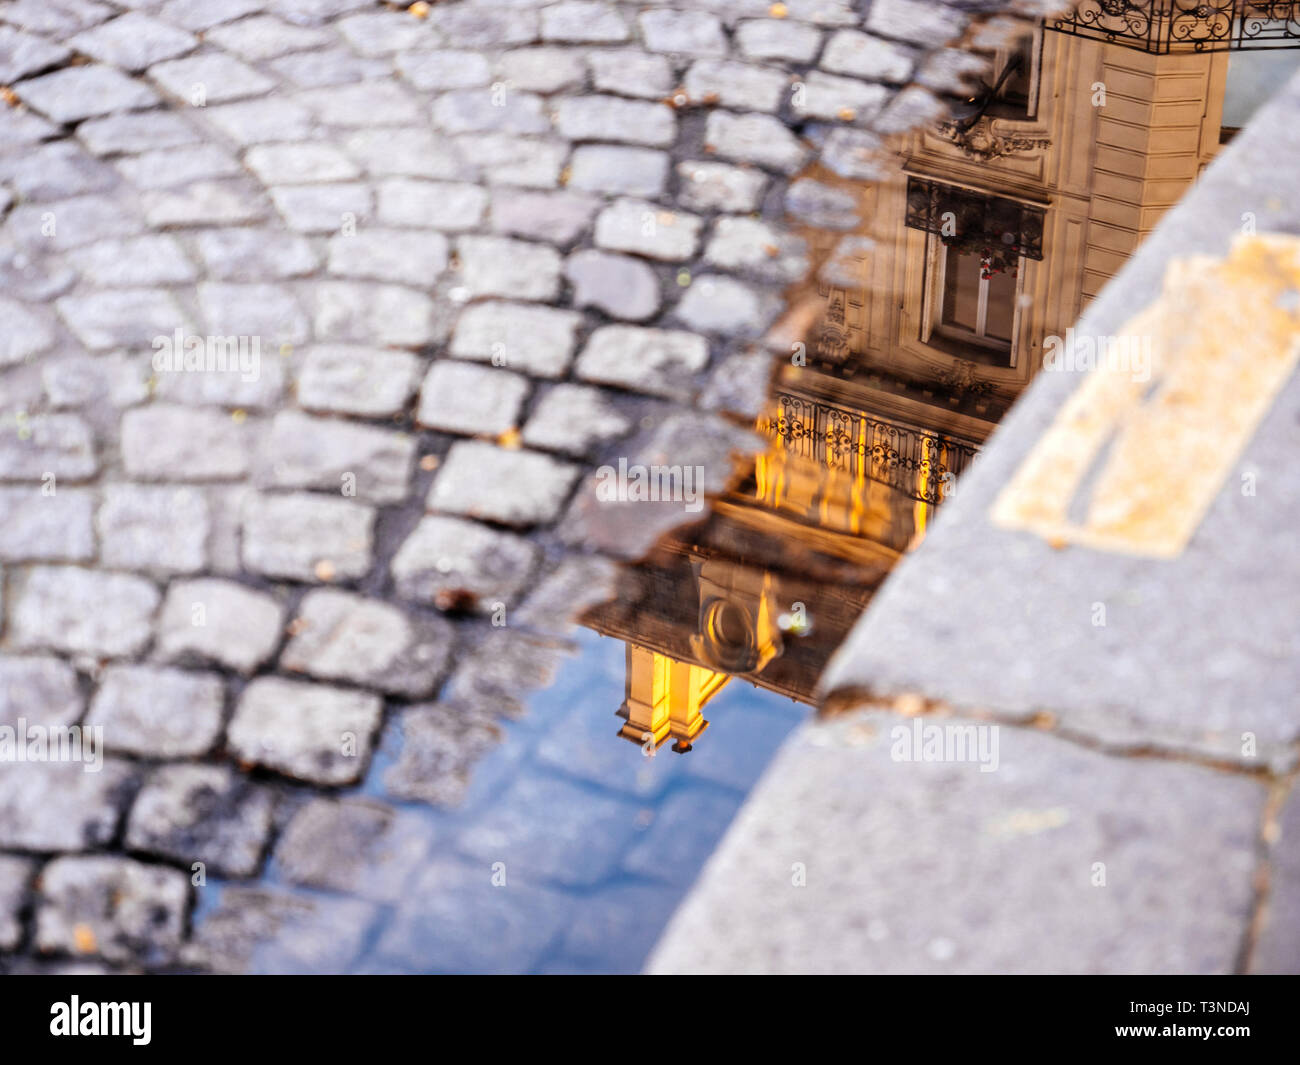 Reflection of luxury parisian apartments building in Haussmannian style in the water poodle on the cobblestone road pavement  Stock Photo